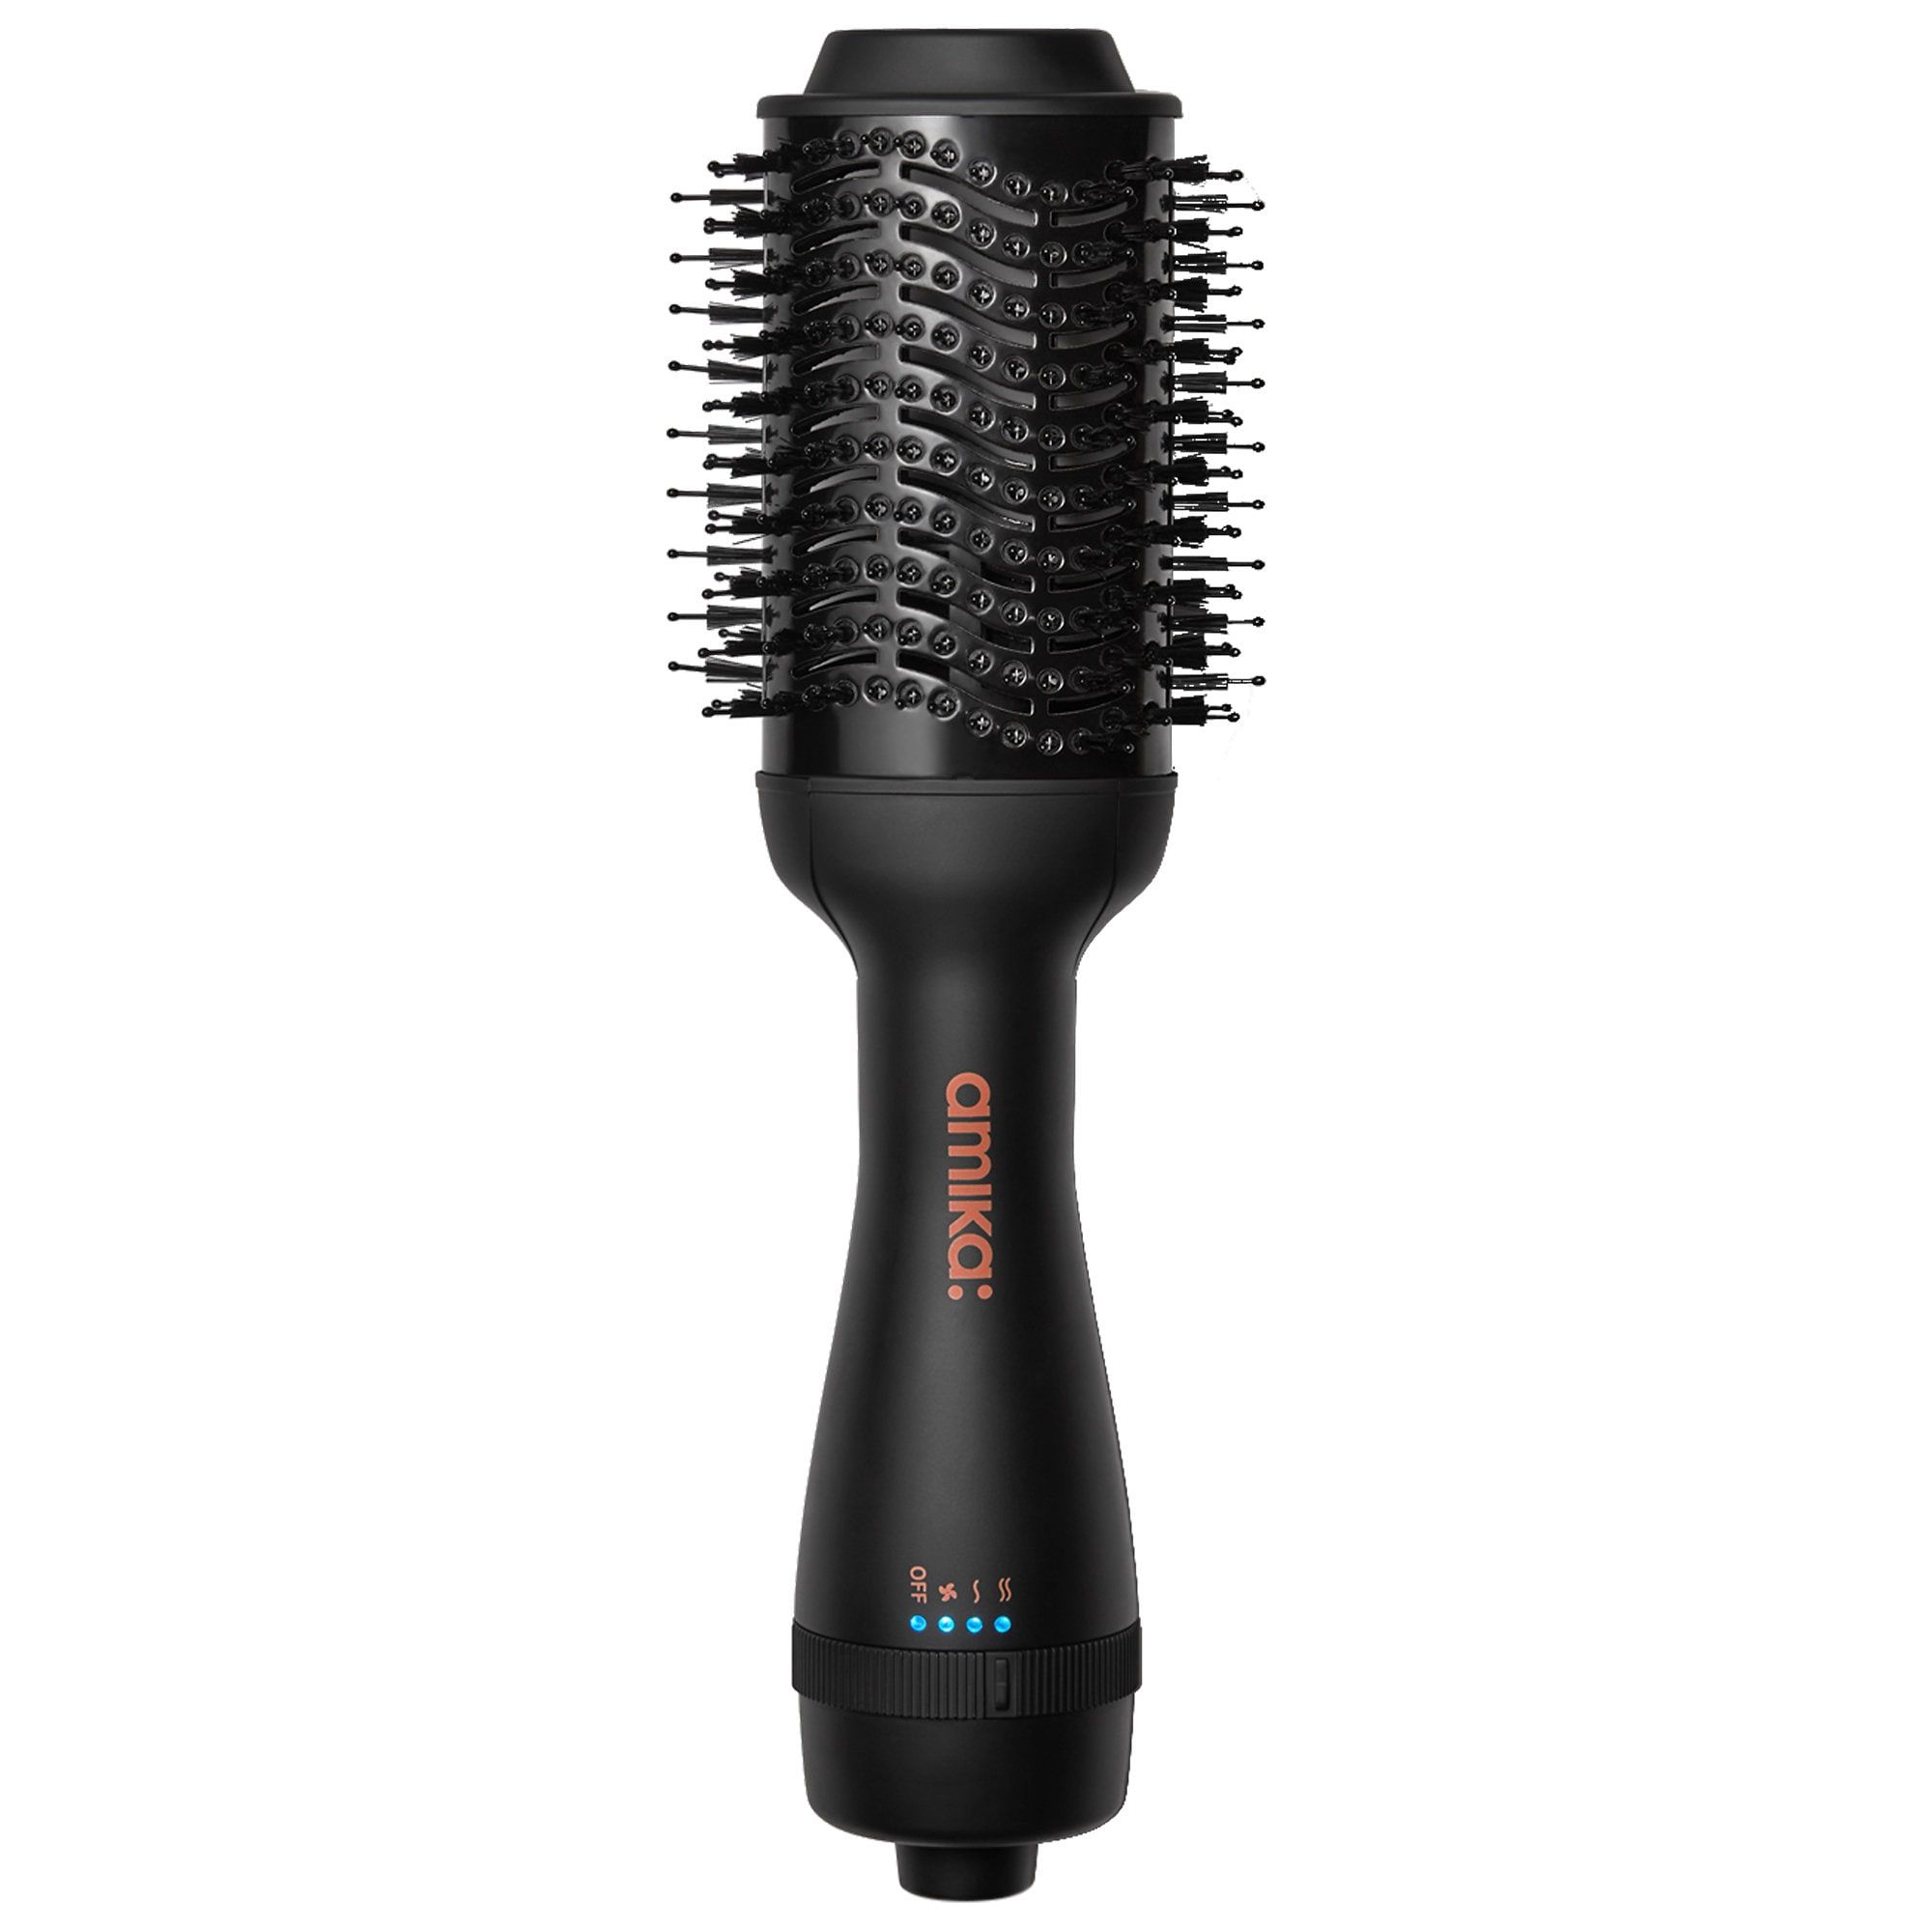 The Best Hair Dryer Volumizer Brush | Hands on Review